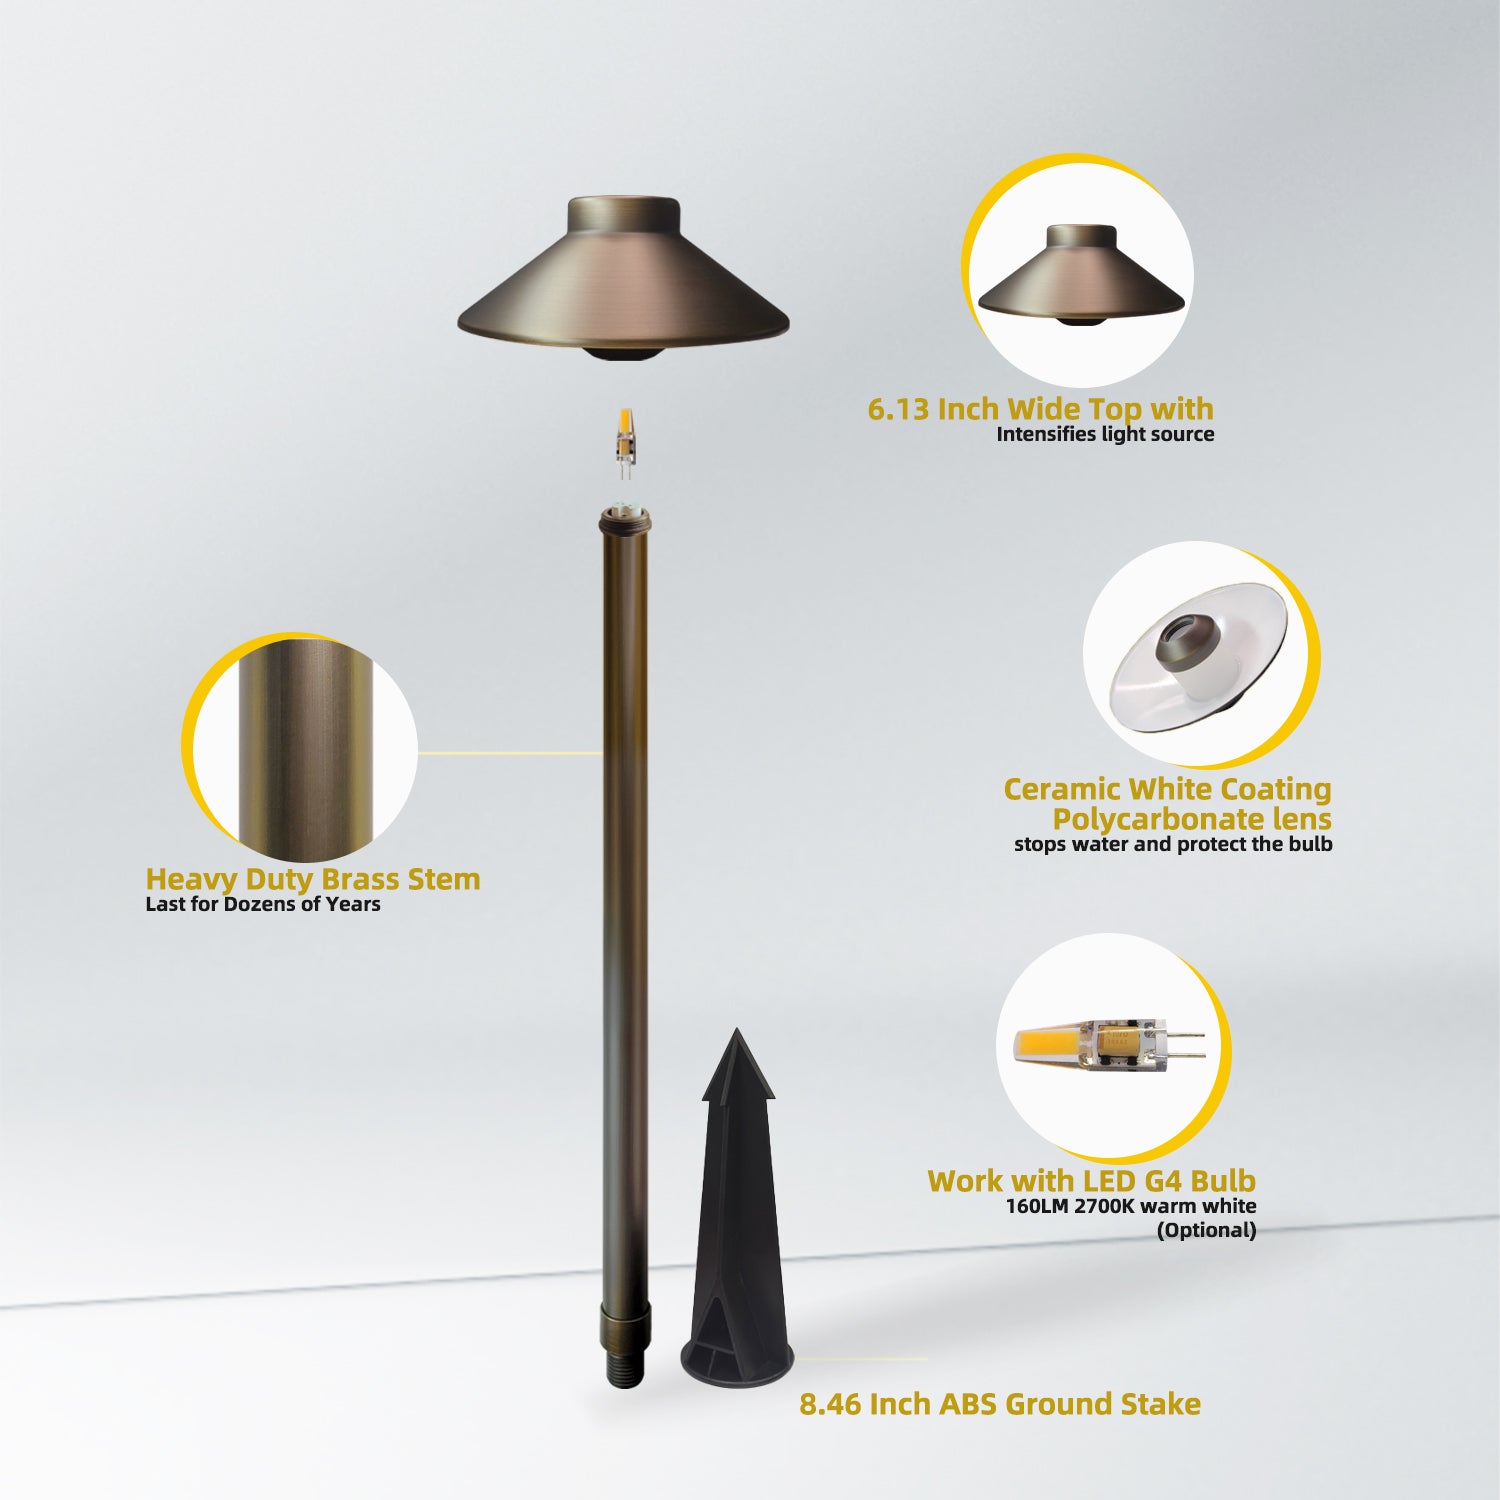 12V Low Voltage Brass Garden Path Light & Area Light COP602B features including 6.13 inch wide top, ceramic white coating polycarbonate lens, heavy-duty brass stem, and 8.46 inch ABS ground stake from COLOER